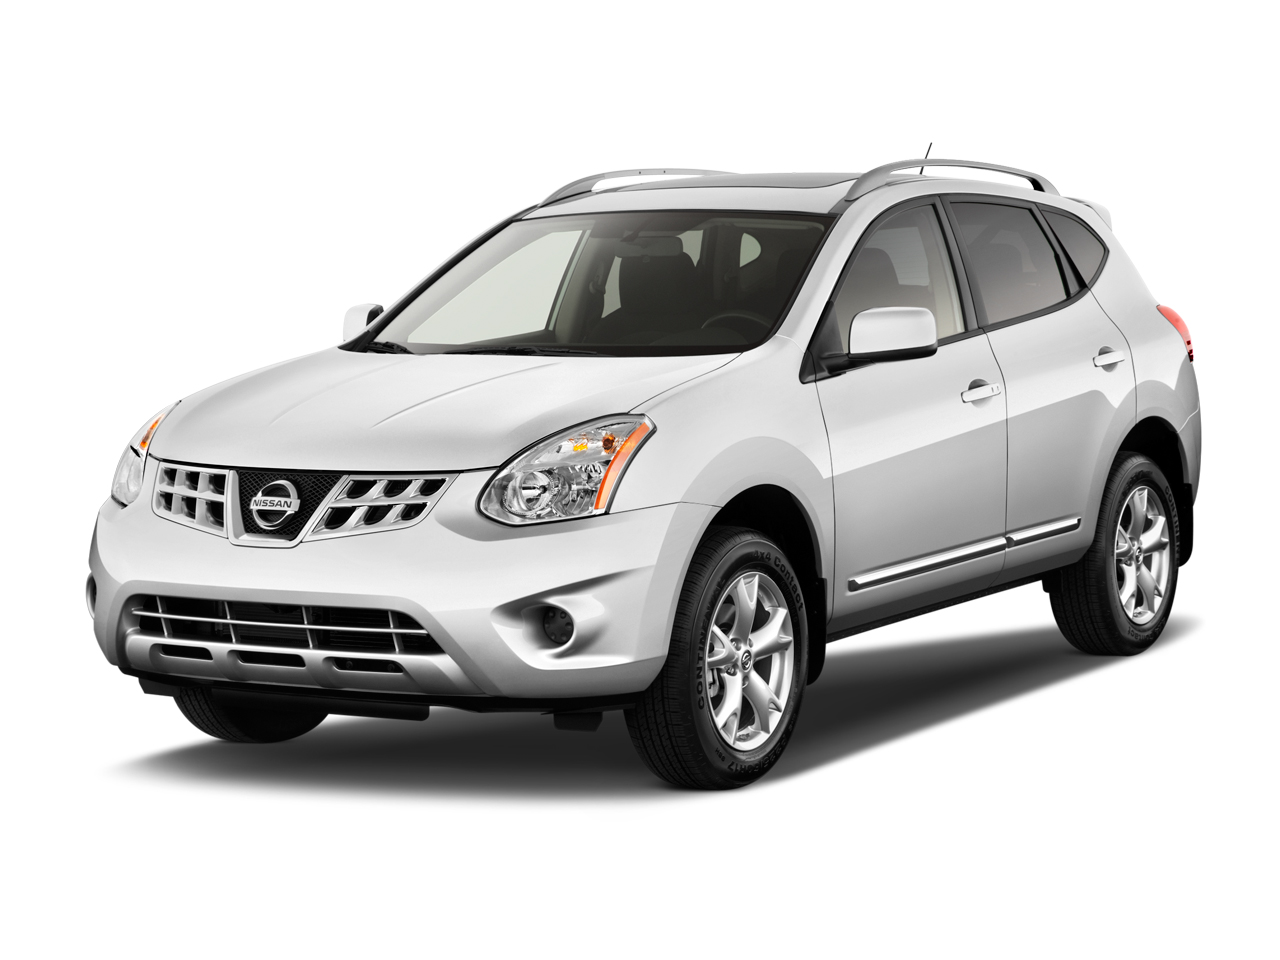 Nissan Rogue Review